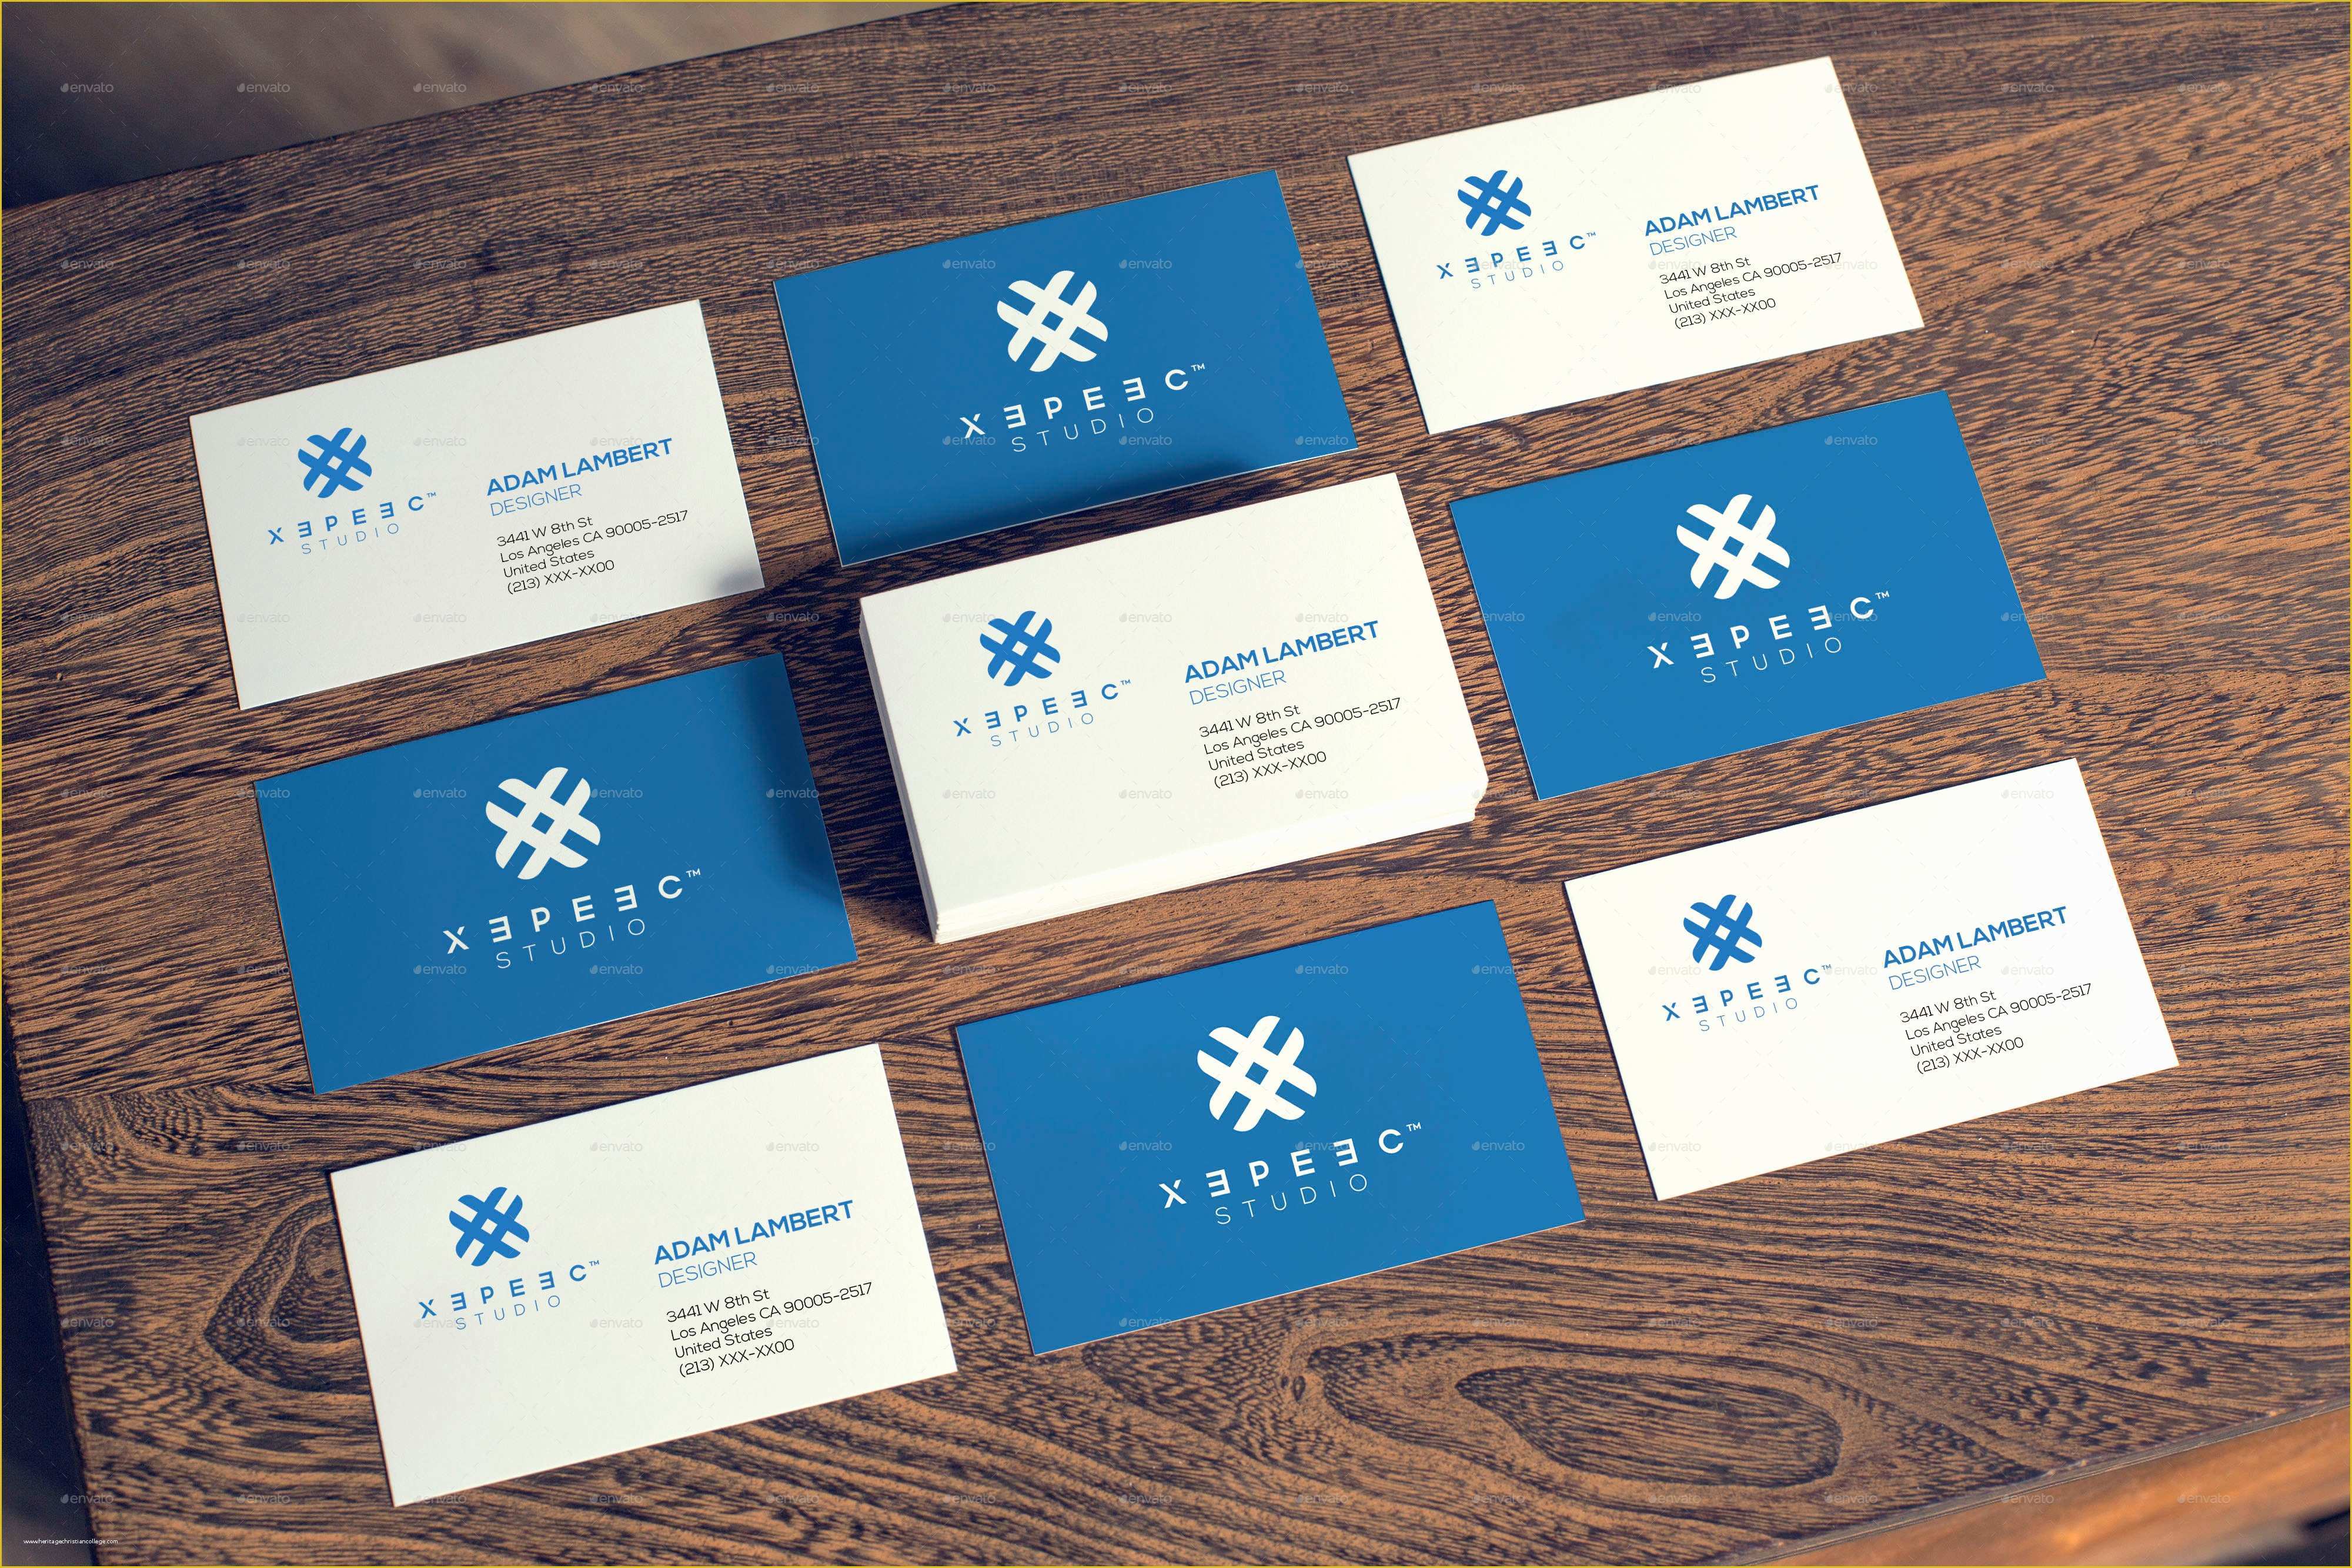 Calling Card Template Free Of Realistic Business Card Mockups by Xepeec